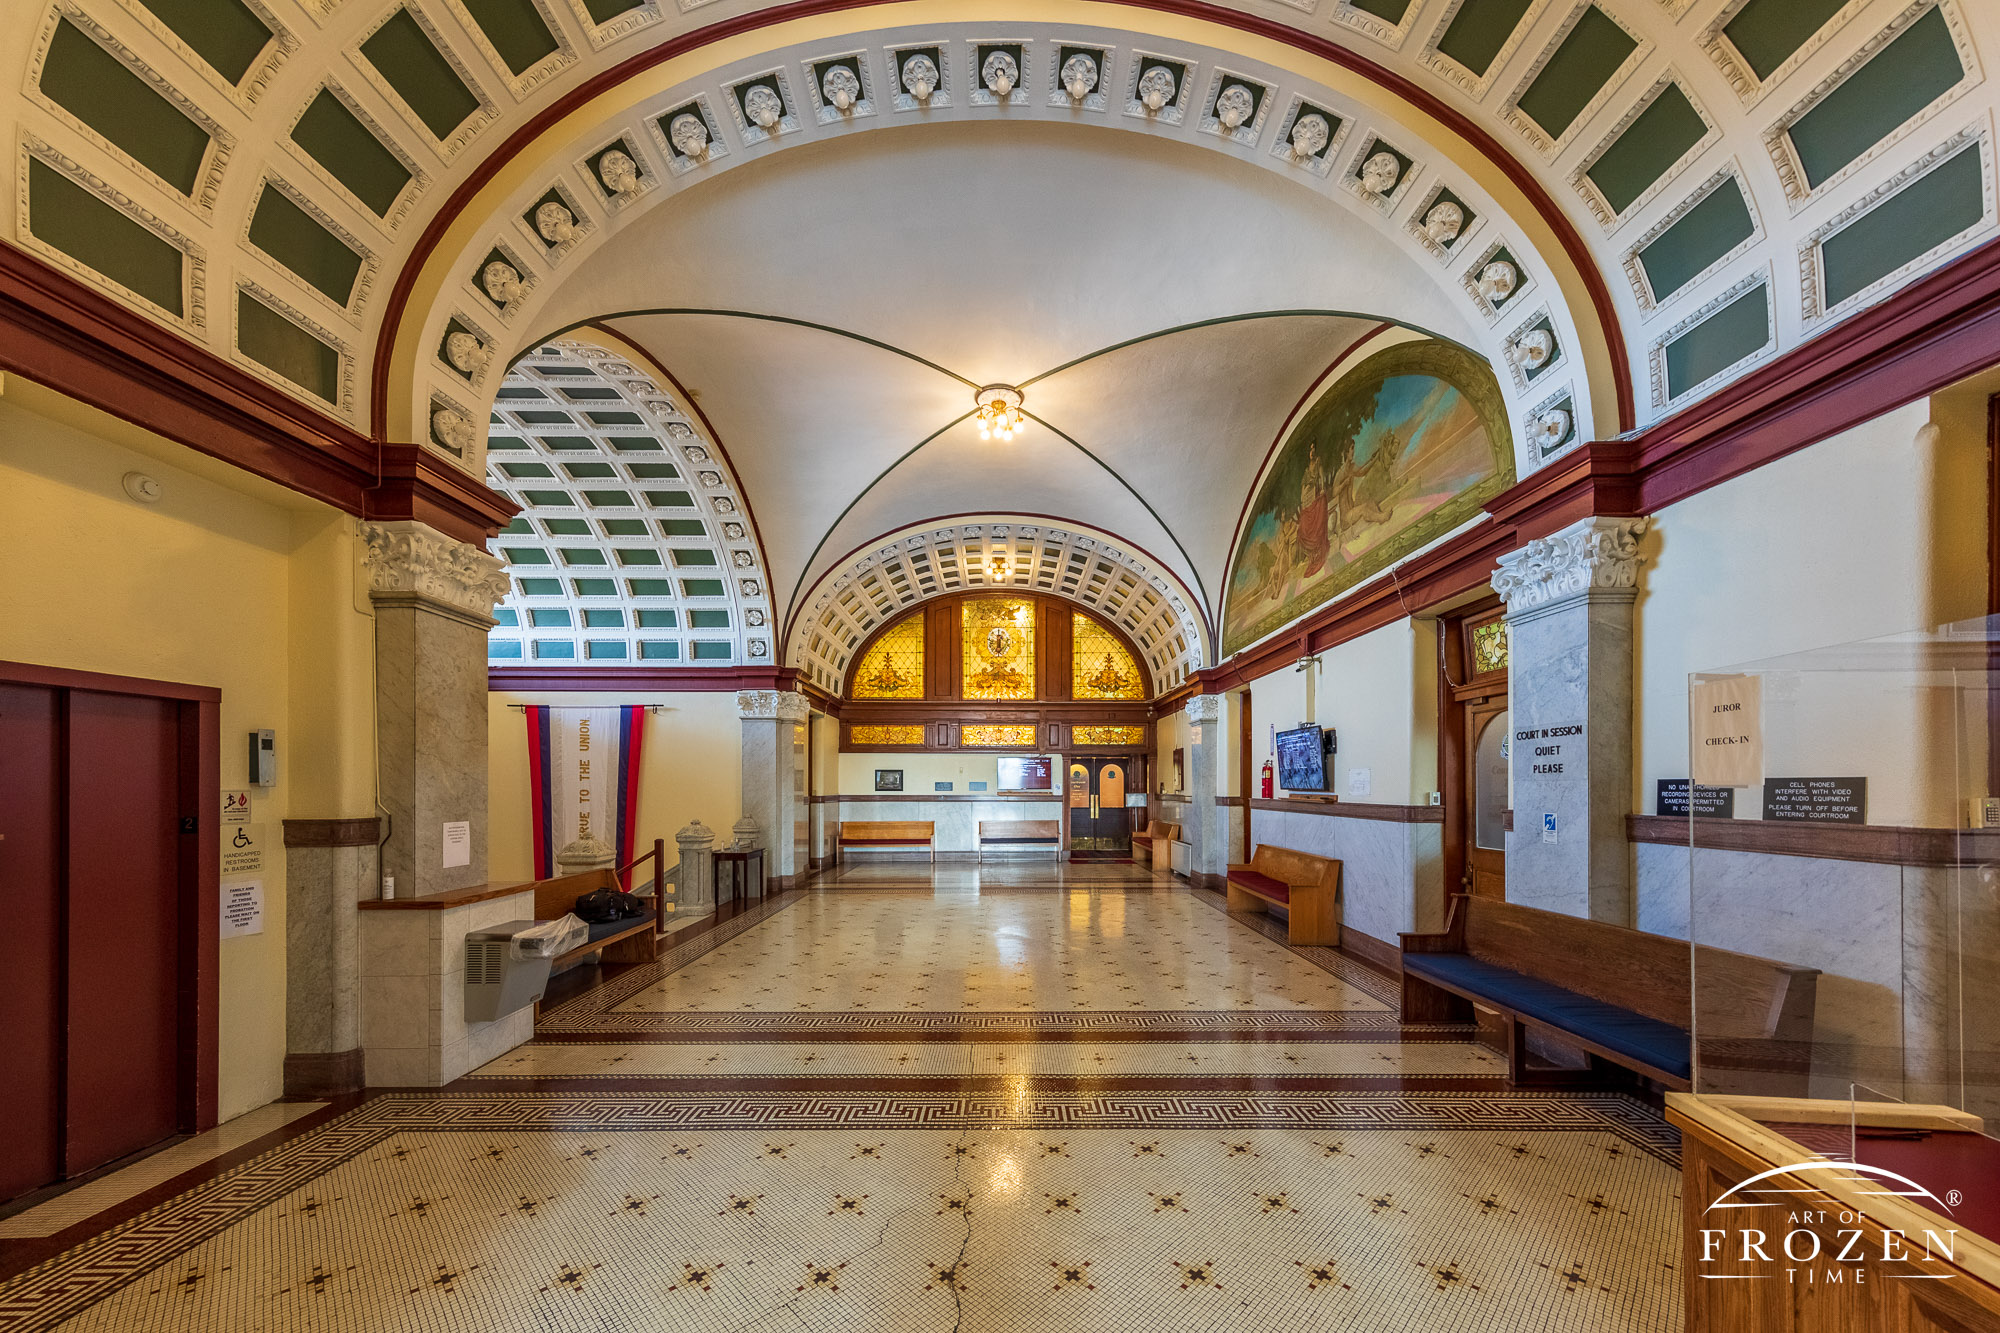 A courtroom hallway featuring vaulted ceilings, murals and stained glass windows